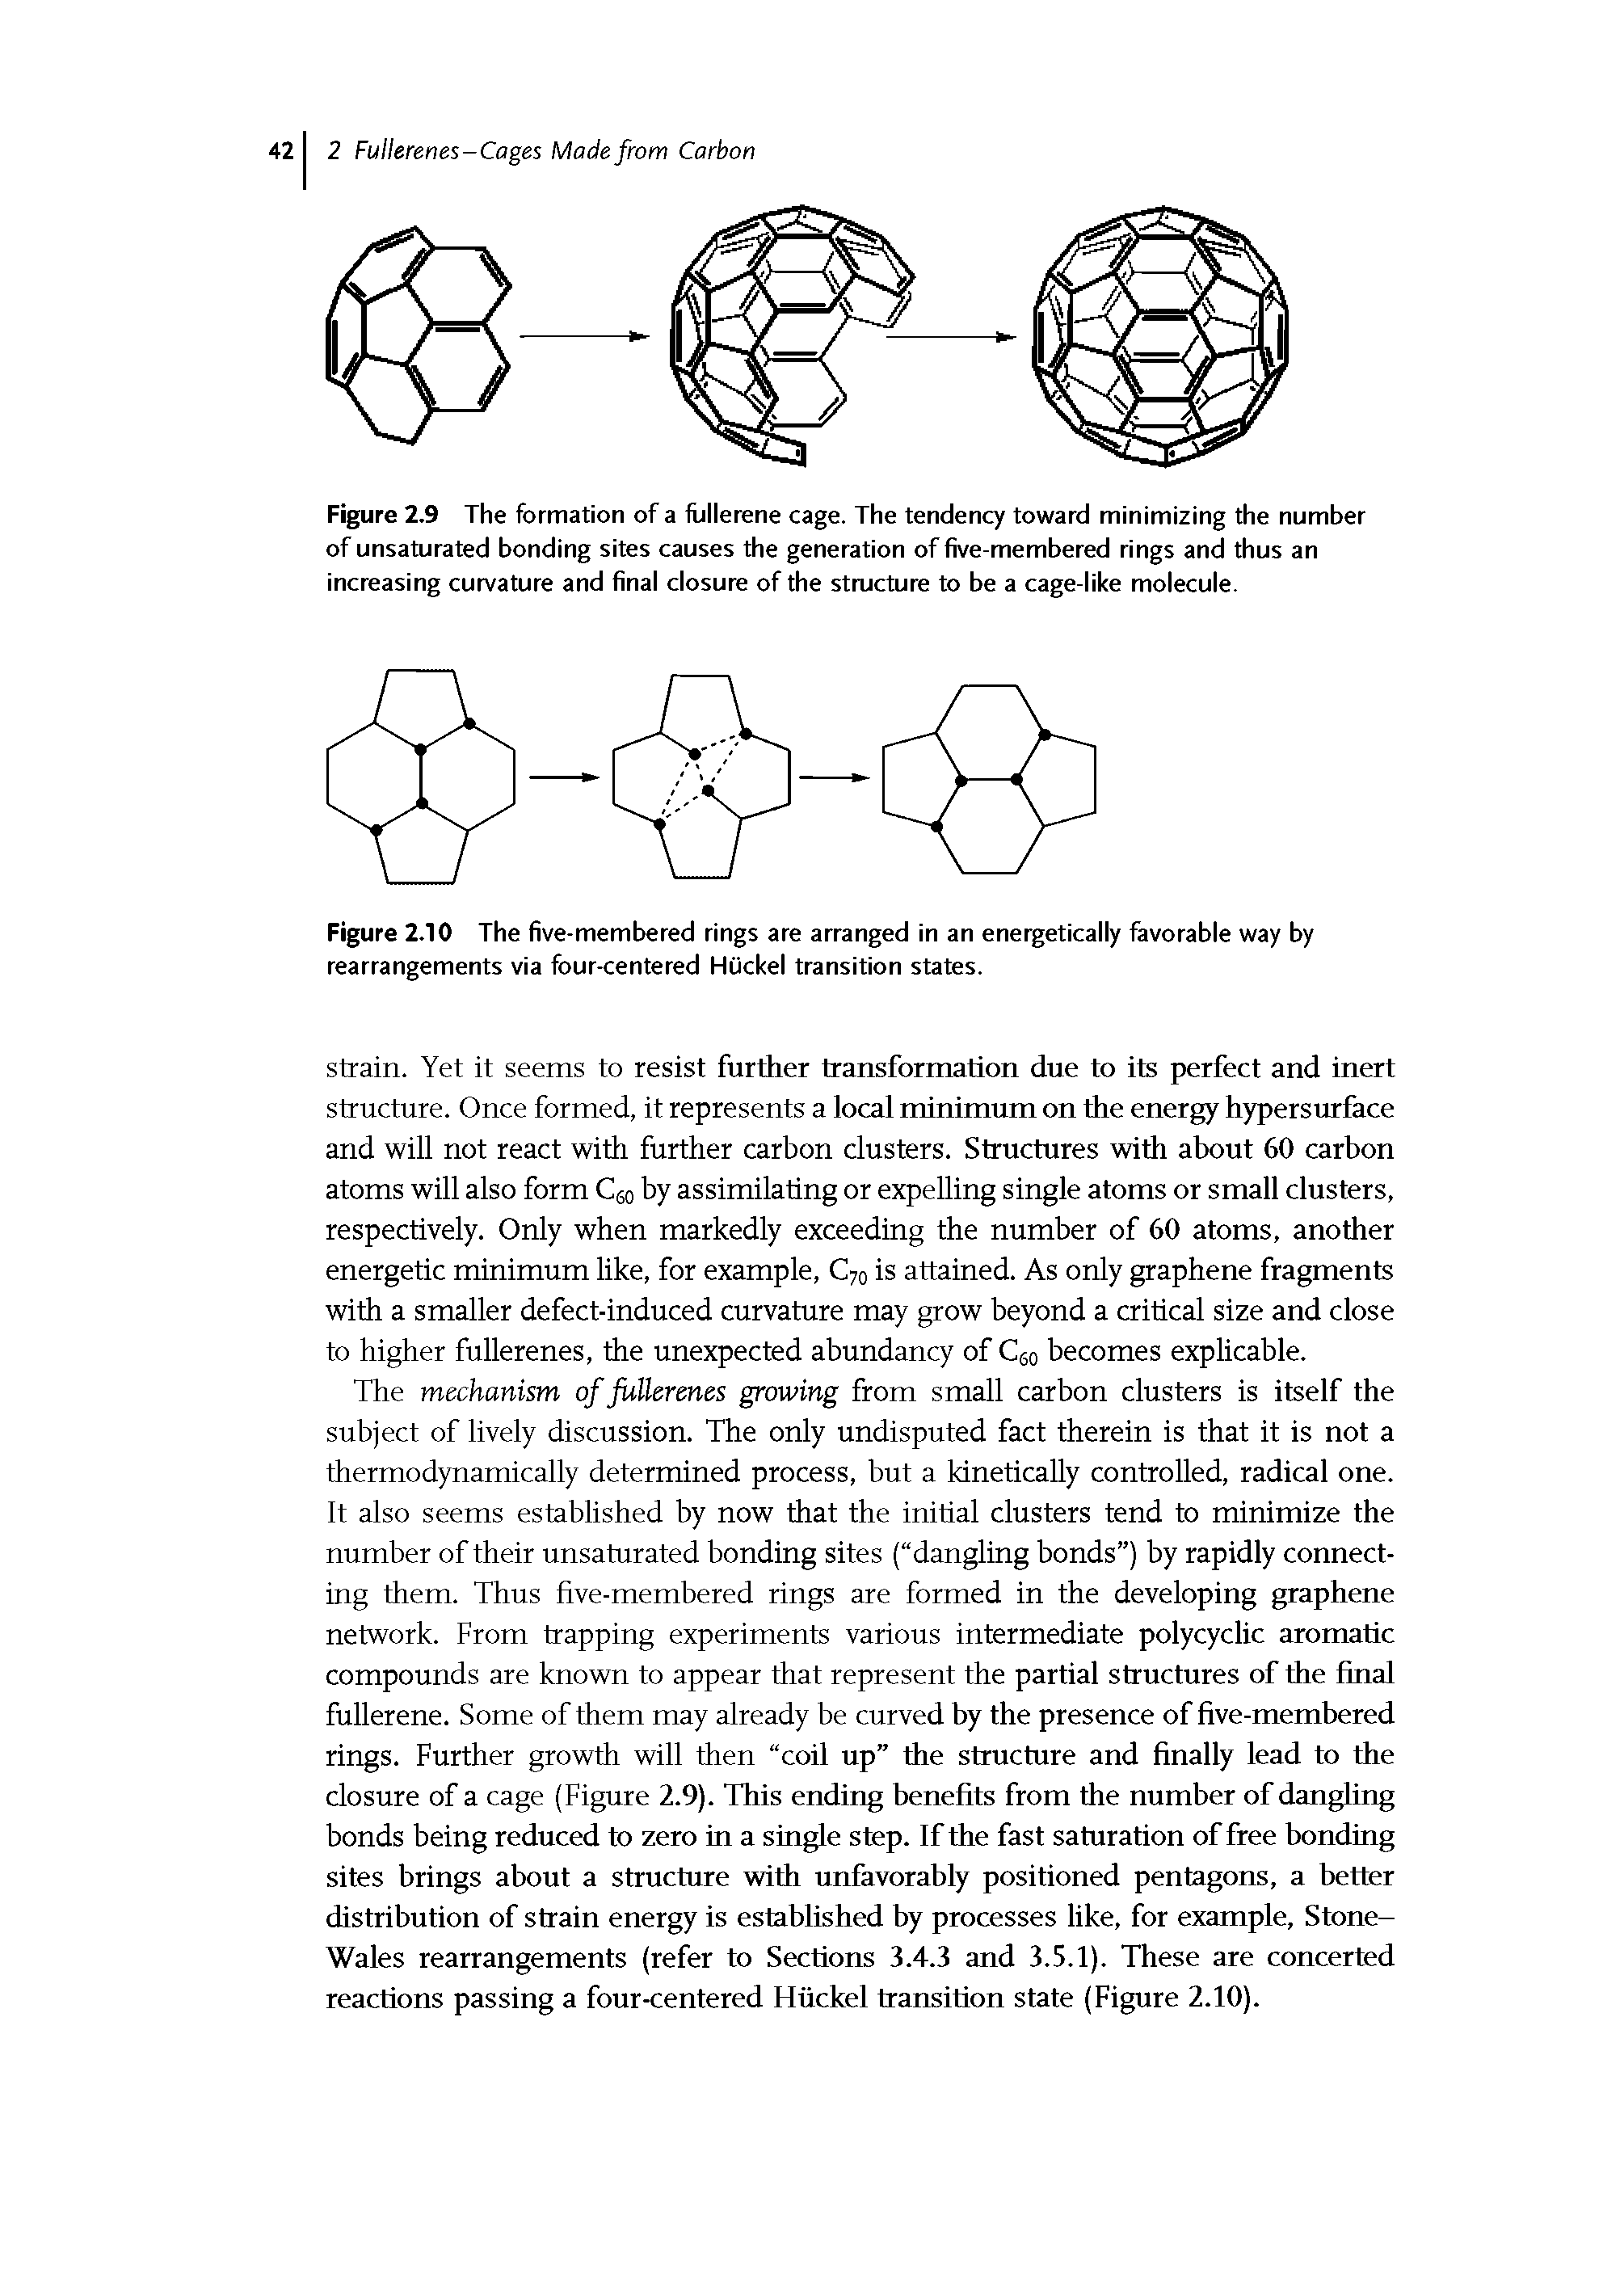 Figure 2.10 The five-membered rings are arranged in an energetically favorable way by rearrangements via four<entered Huckel transition states.